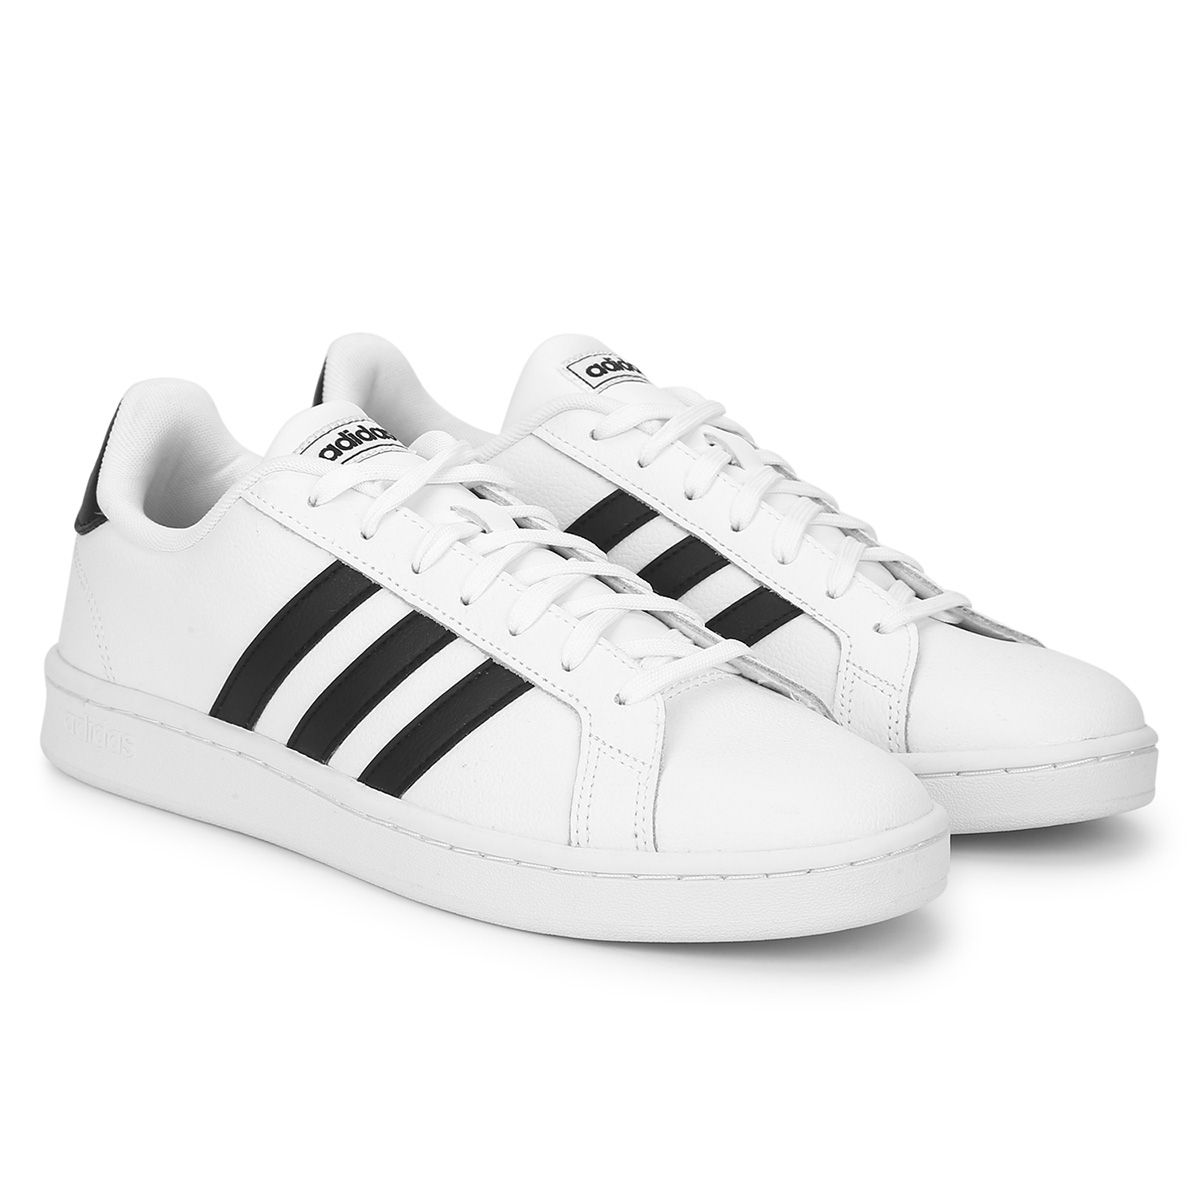 adidas Grand Court White Tennis Shoes: Buy adidas Grand Court White ...